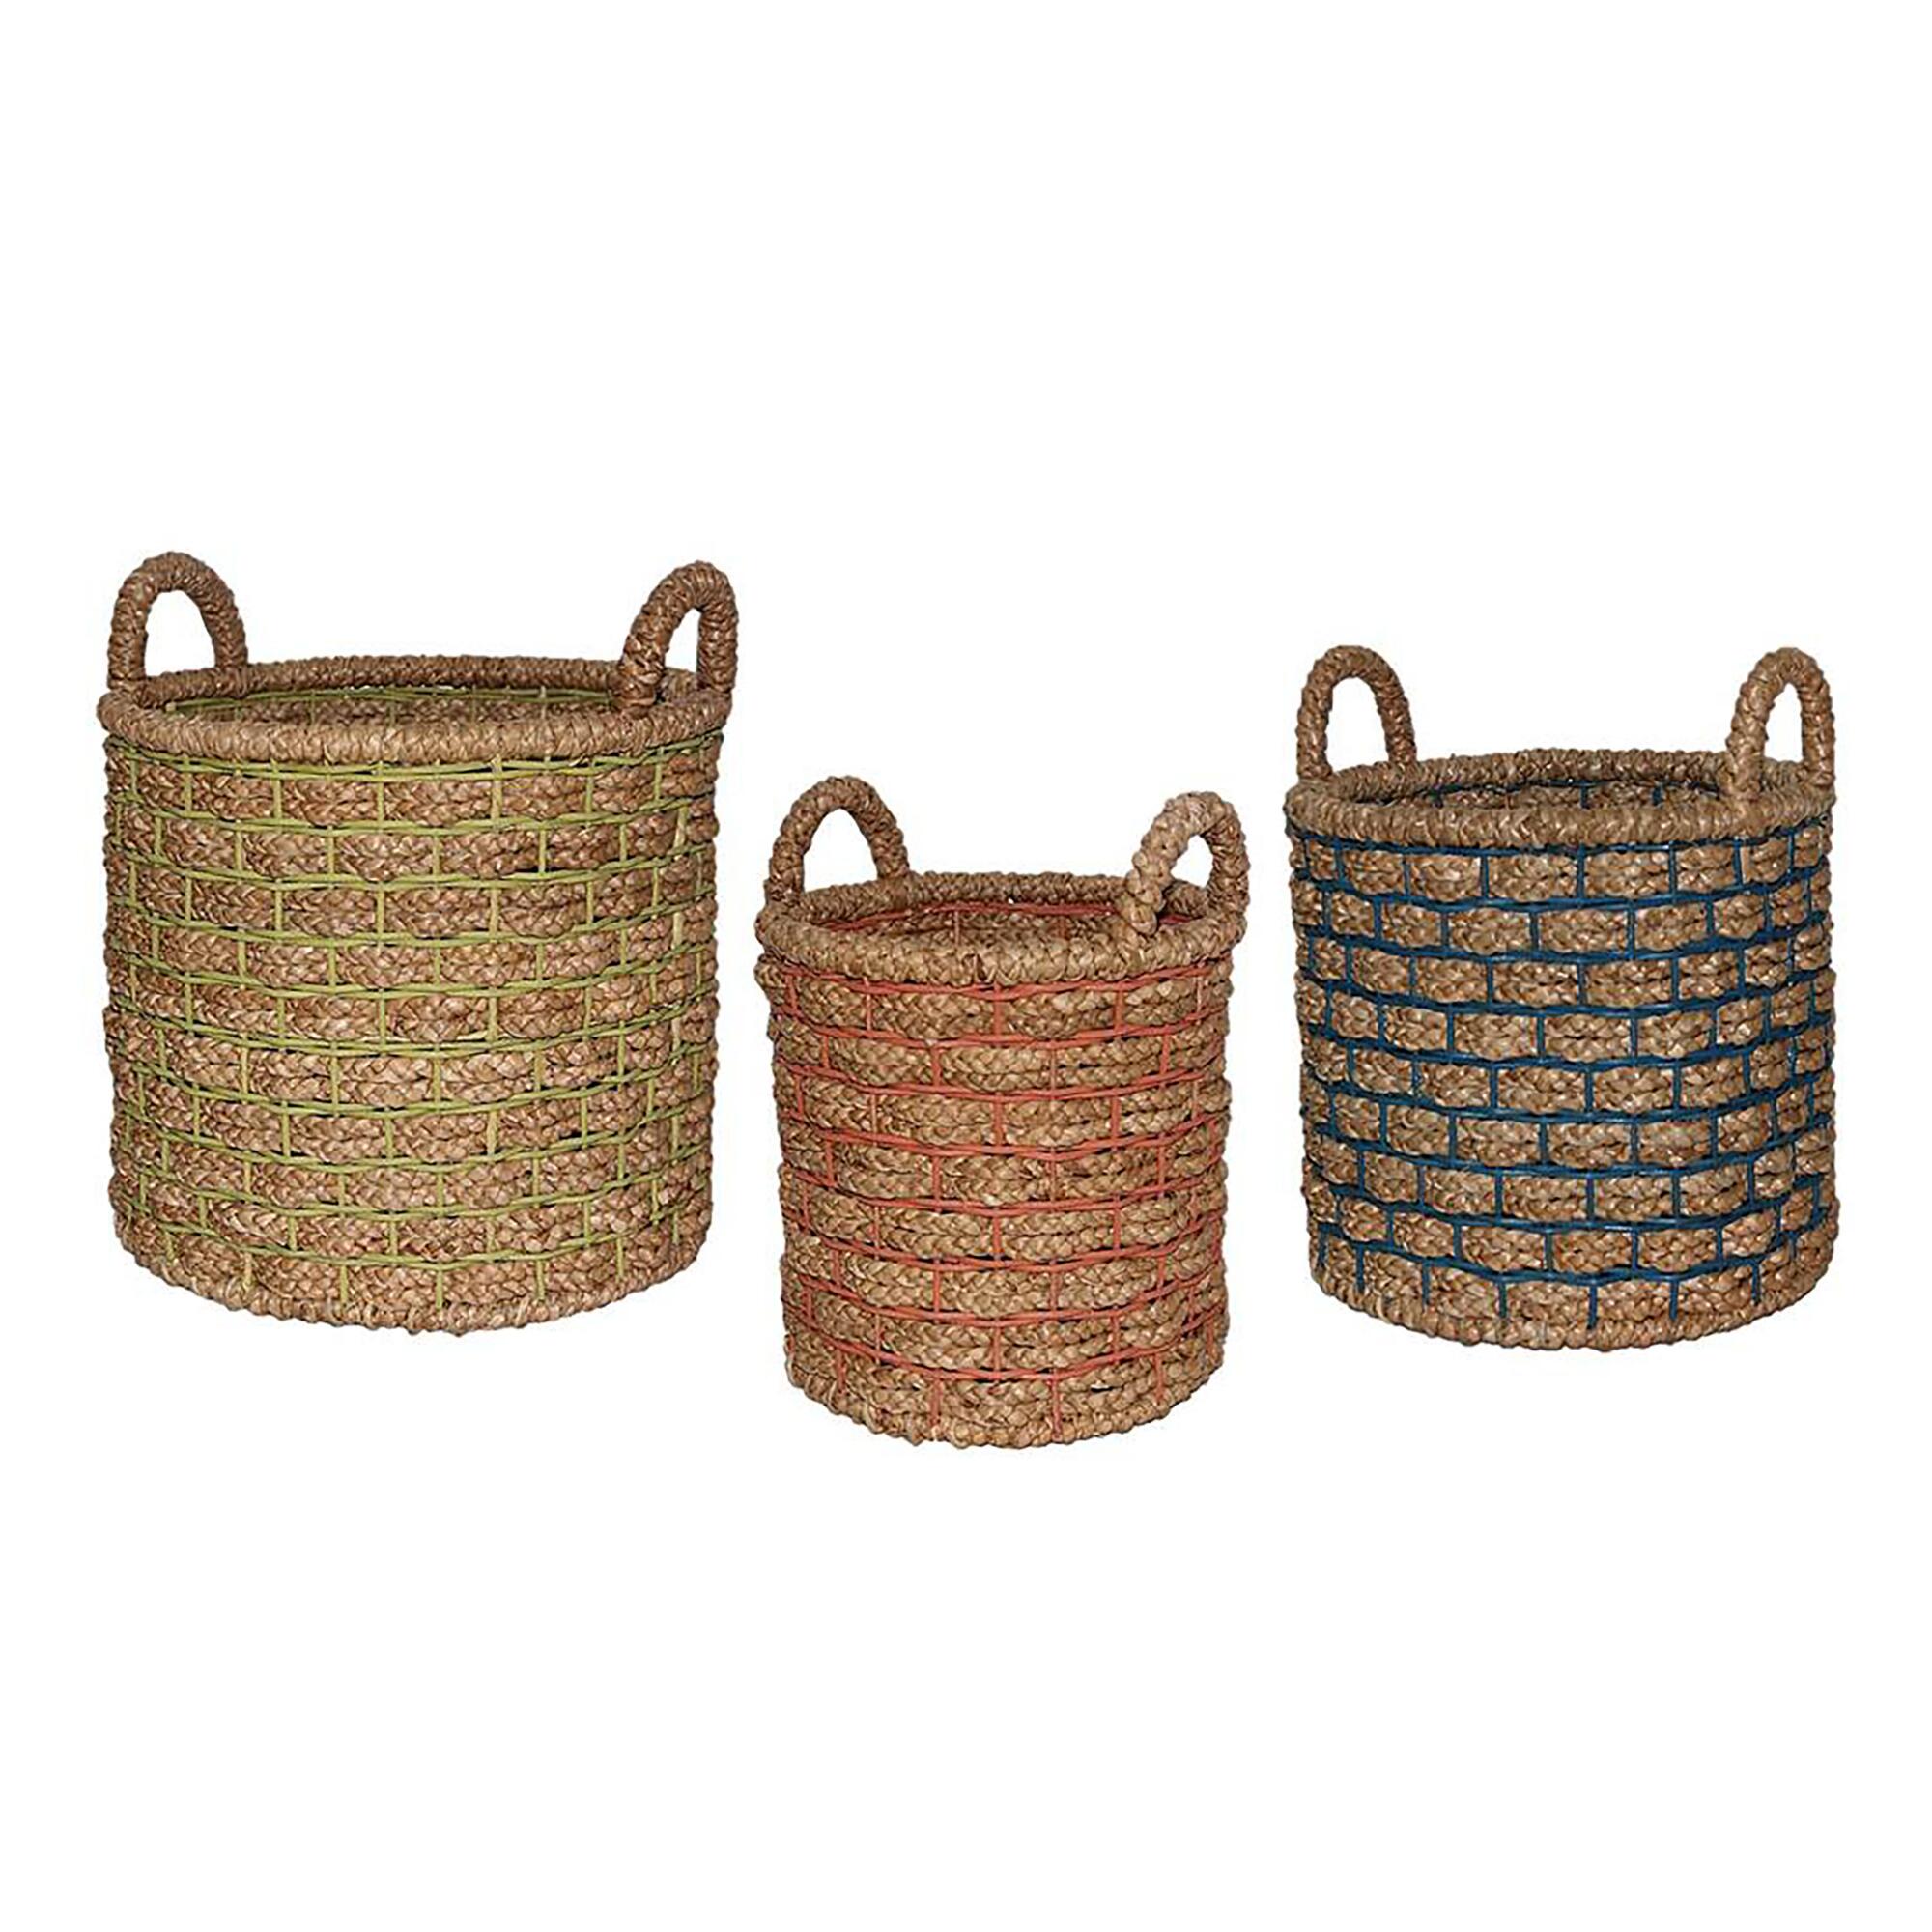 Natural Hyacinth Presley Tote Basket With Color Overlay by World Market